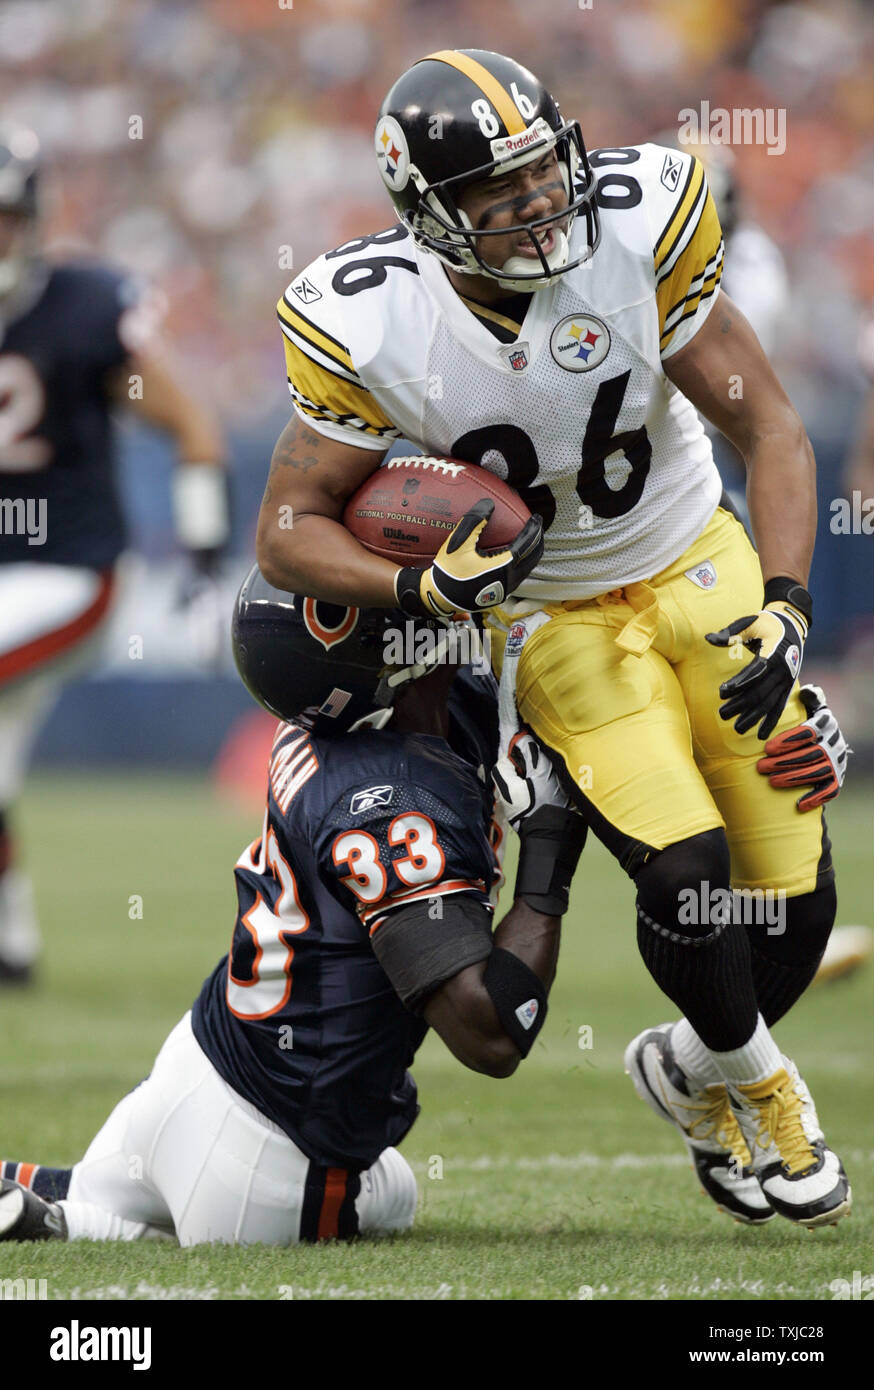 Chicago Bears cornerback Charles Tillman (33) tackles Pittsburgh Steelers wide receiver Hines Ward (86) during the first quarter at Soldier Field in Chicago on September 20, 2009. UPI /Mark Cowan Stock Photo